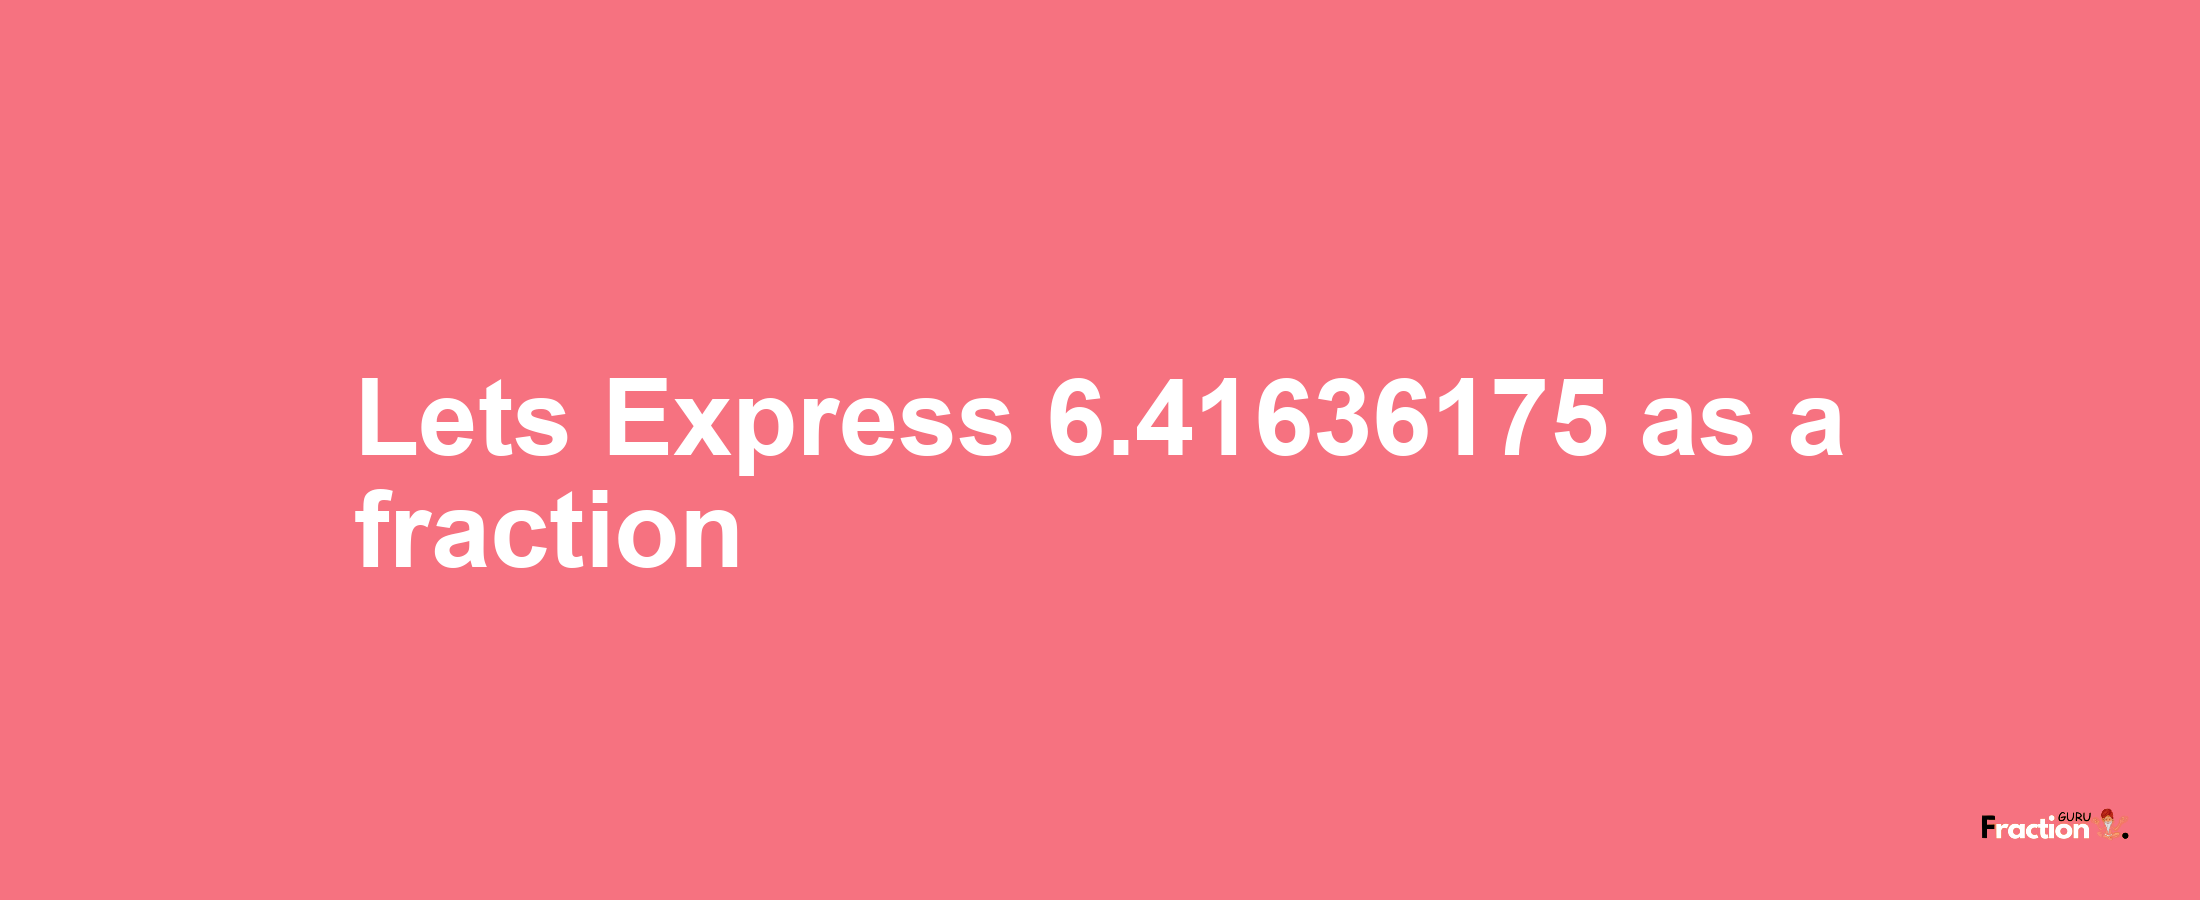 Lets Express 6.41636175 as afraction